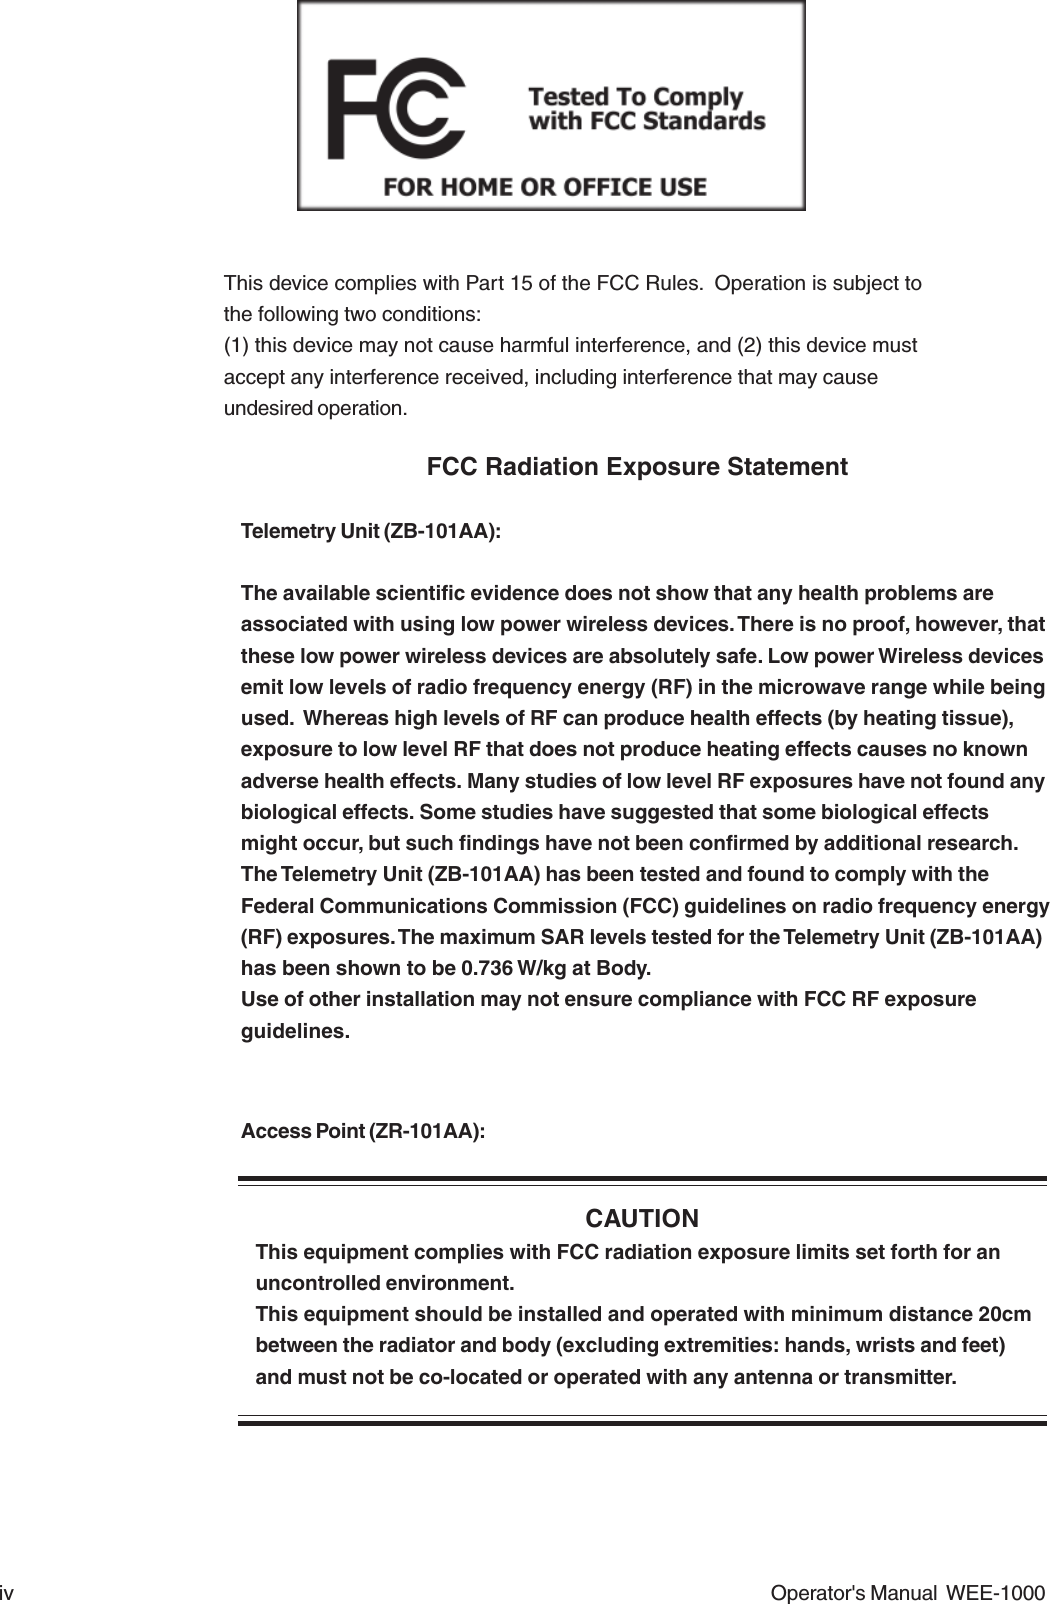 iv Operator&apos;s Manual  WEE-1000This device complies with Part 15 of the FCC Rules.  Operation is subject tothe following two conditions:(1) this device may not cause harmful interference, and (2) this device mustaccept any interference received, including interference that may causeundesired operation.FCC Radiation Exposure StatementTelemetry Unit (ZB-101AA):The available scientific evidence does not show that any health problems areassociated with using low power wireless devices. There is no proof, however, thatthese low power wireless devices are absolutely safe. Low power Wireless devicesemit low levels of radio frequency energy (RF) in the microwave range while beingused.  Whereas high levels of RF can produce health effects (by heating tissue),exposure to low level RF that does not produce heating effects causes no knownadverse health effects. Many studies of low level RF exposures have not found anybiological effects. Some studies have suggested that some biological effectsmight occur, but such findings have not been confirmed by additional research.The Telemetry Unit (ZB-101AA) has been tested and found to comply with theFederal Communications Commission (FCC) guidelines on radio frequency energy(RF) exposures. The maximum SAR levels tested for the Telemetry Unit (ZB-101AA)has been shown to be 0.736 W/kg at Body.Use of other installation may not ensure compliance with FCC RF exposureguidelines.Access Point (ZR-101AA):CAUTIONThis equipment complies with FCC radiation exposure limits set forth for anuncontrolled environment.This equipment should be installed and operated with minimum distance 20cmbetween the radiator and body (excluding extremities: hands, wrists and feet)and must not be co-located or operated with any antenna or transmitter.